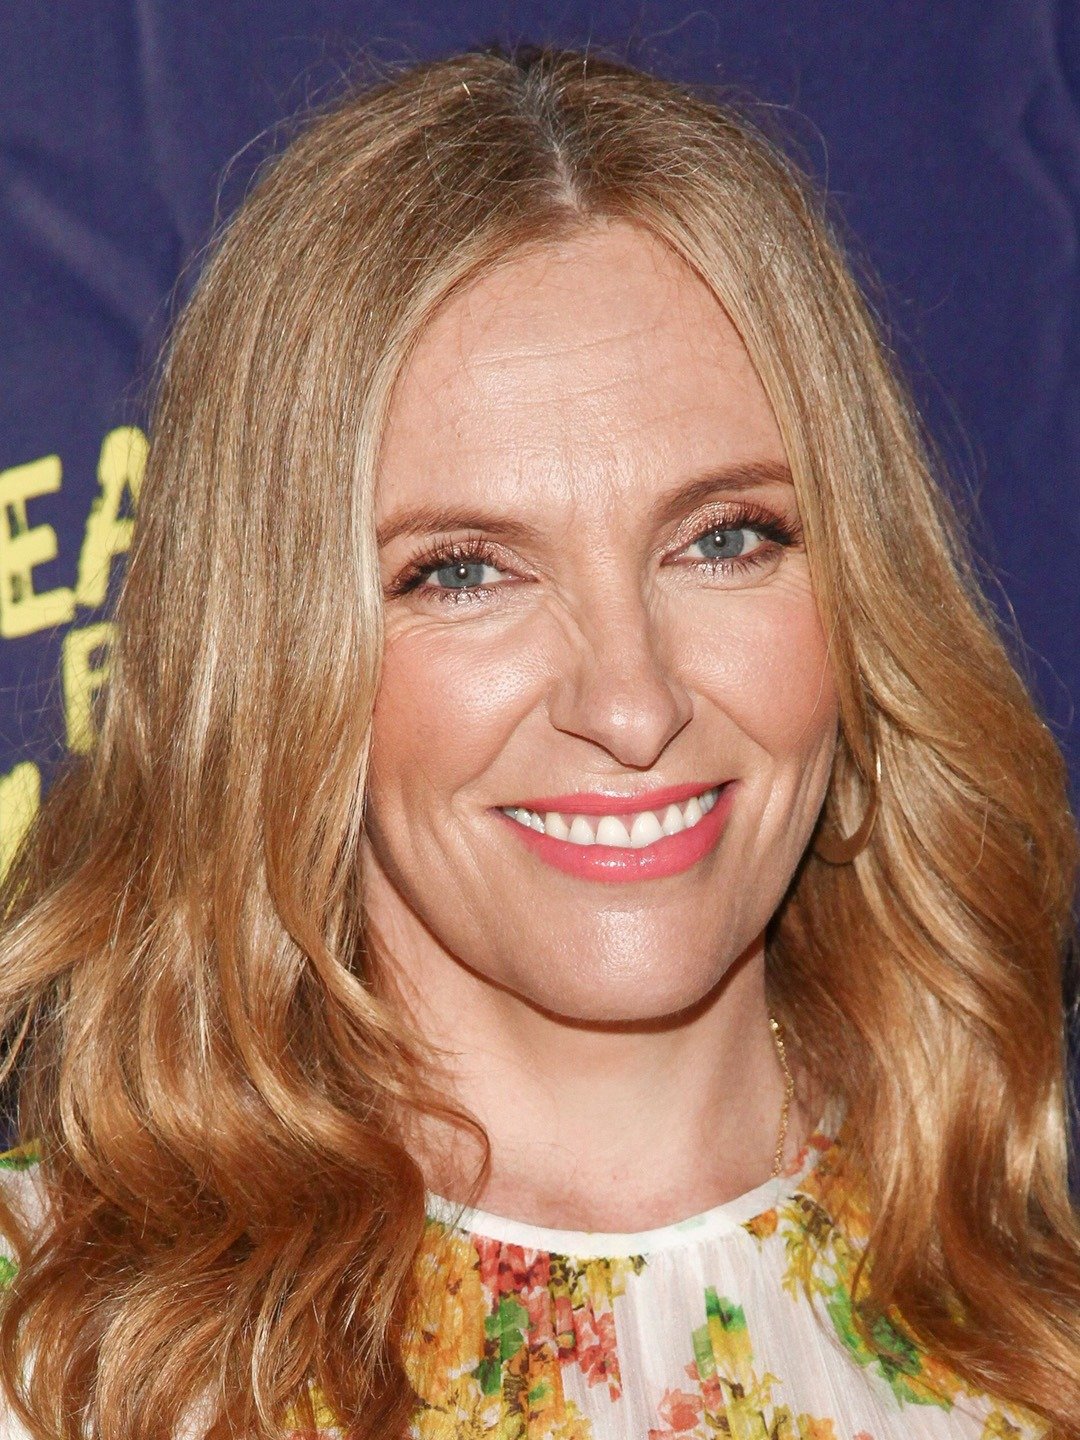 How tall is Toni Collette?